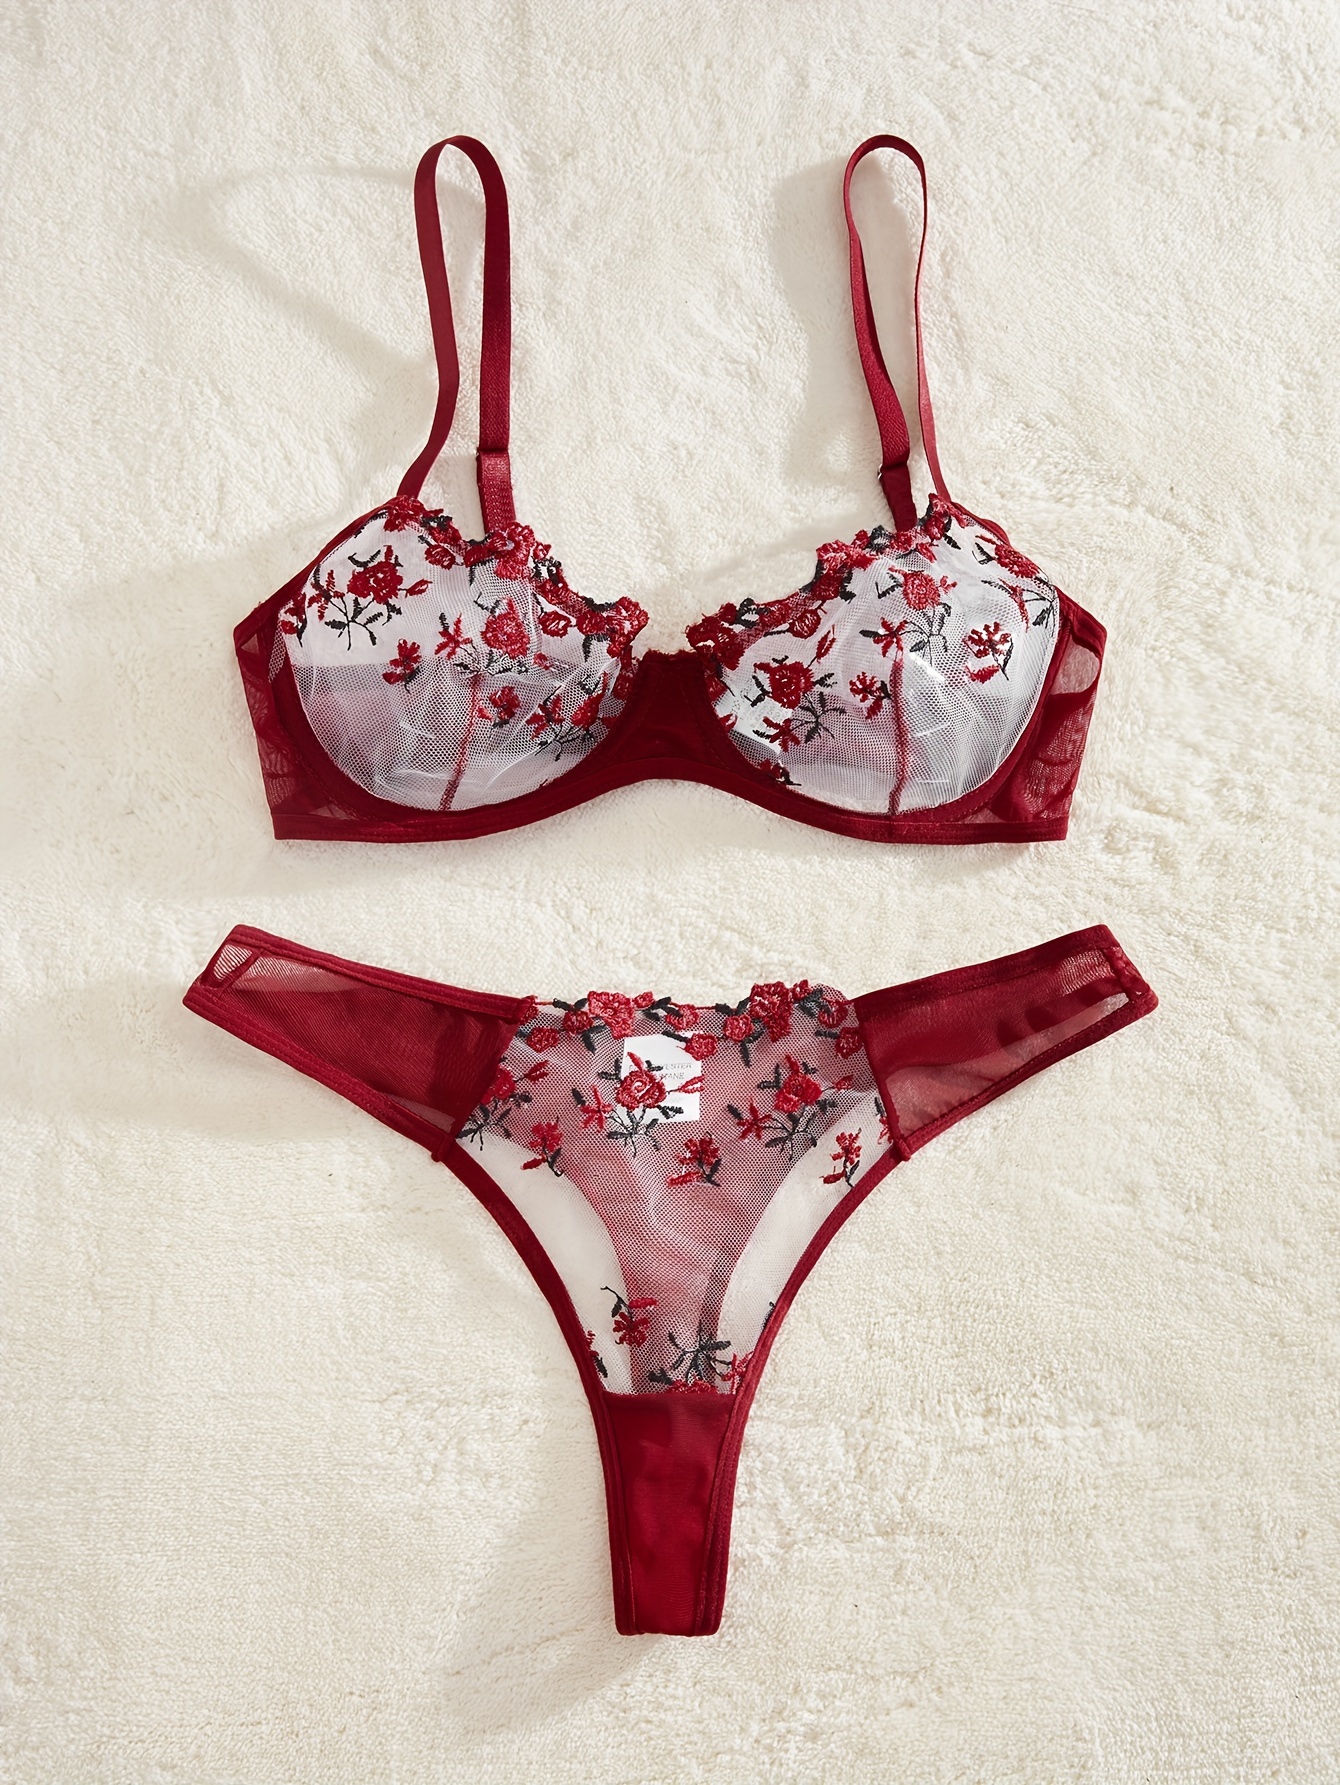 Star Flower Lace Bands Matching Bralette and Panty Match Set